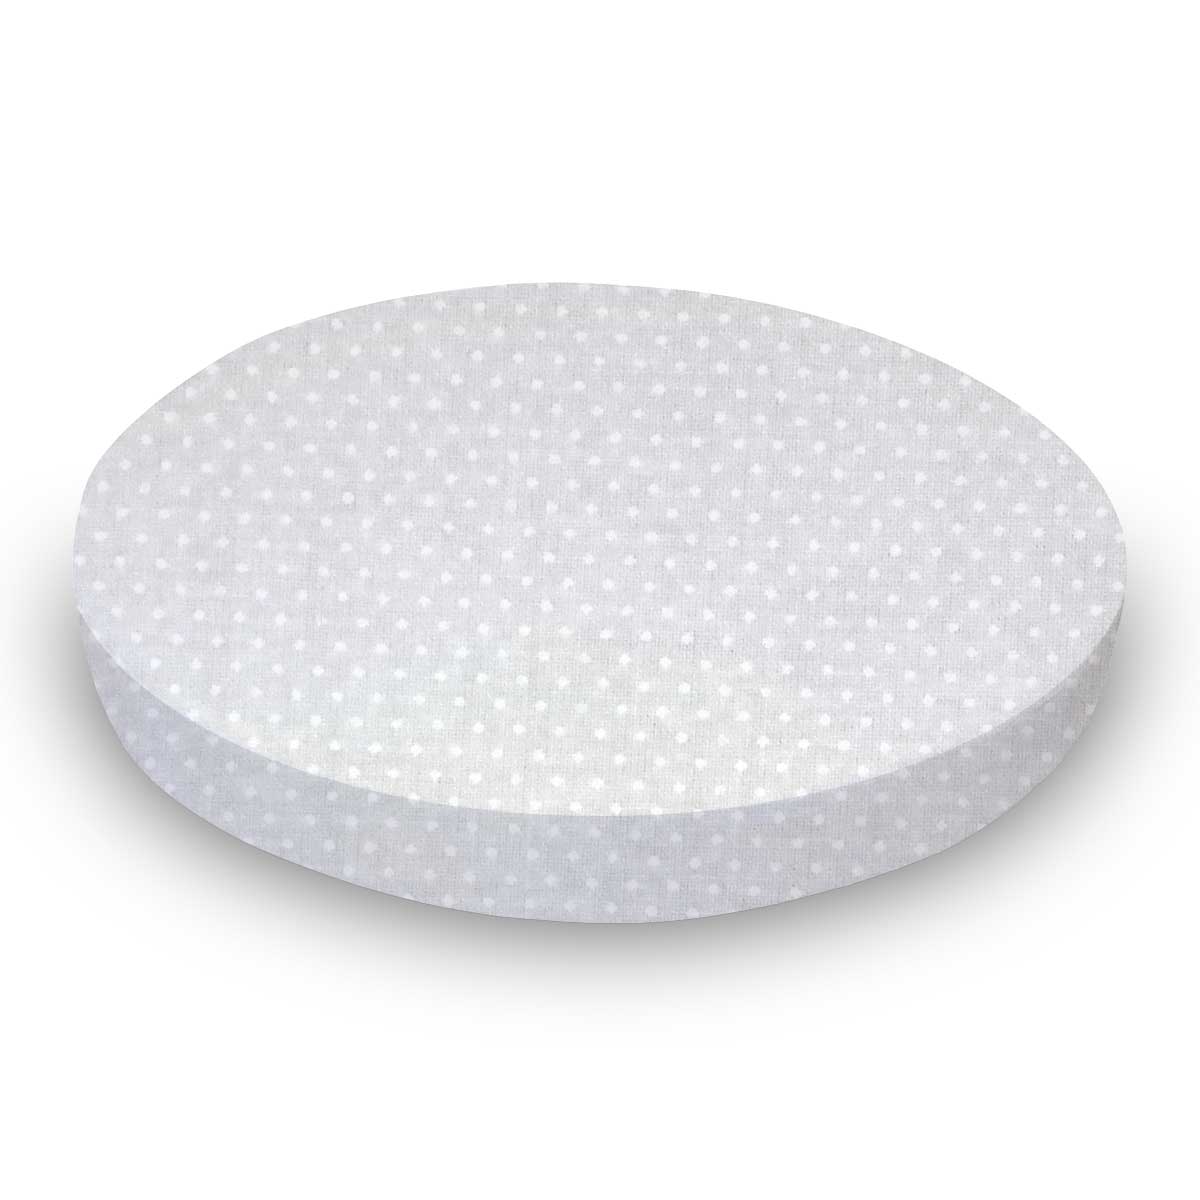 Oval Crib (Stokke Sleepi) - White On White Pindots - Fitted  Oval